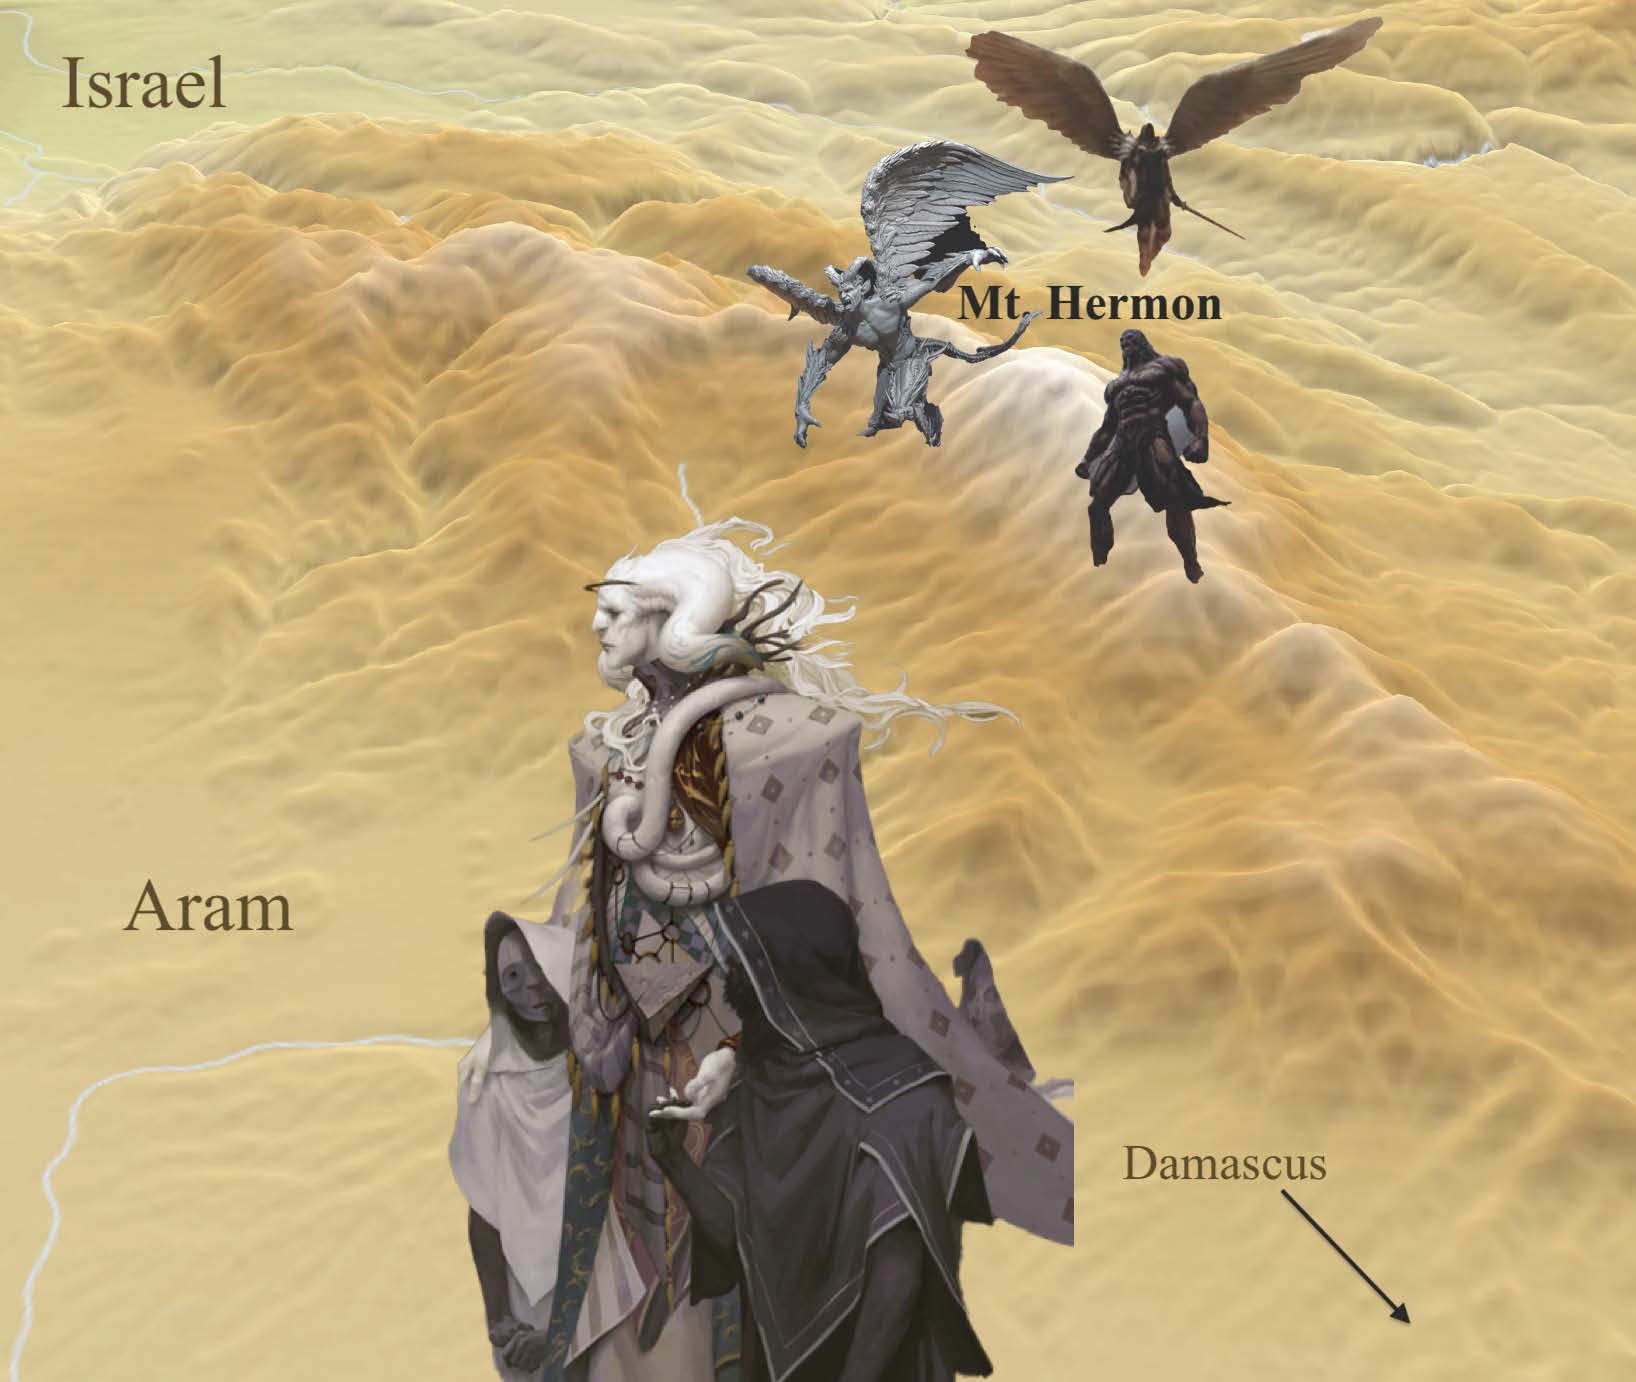 The descent of the Watchers upon Mt. Hermon.